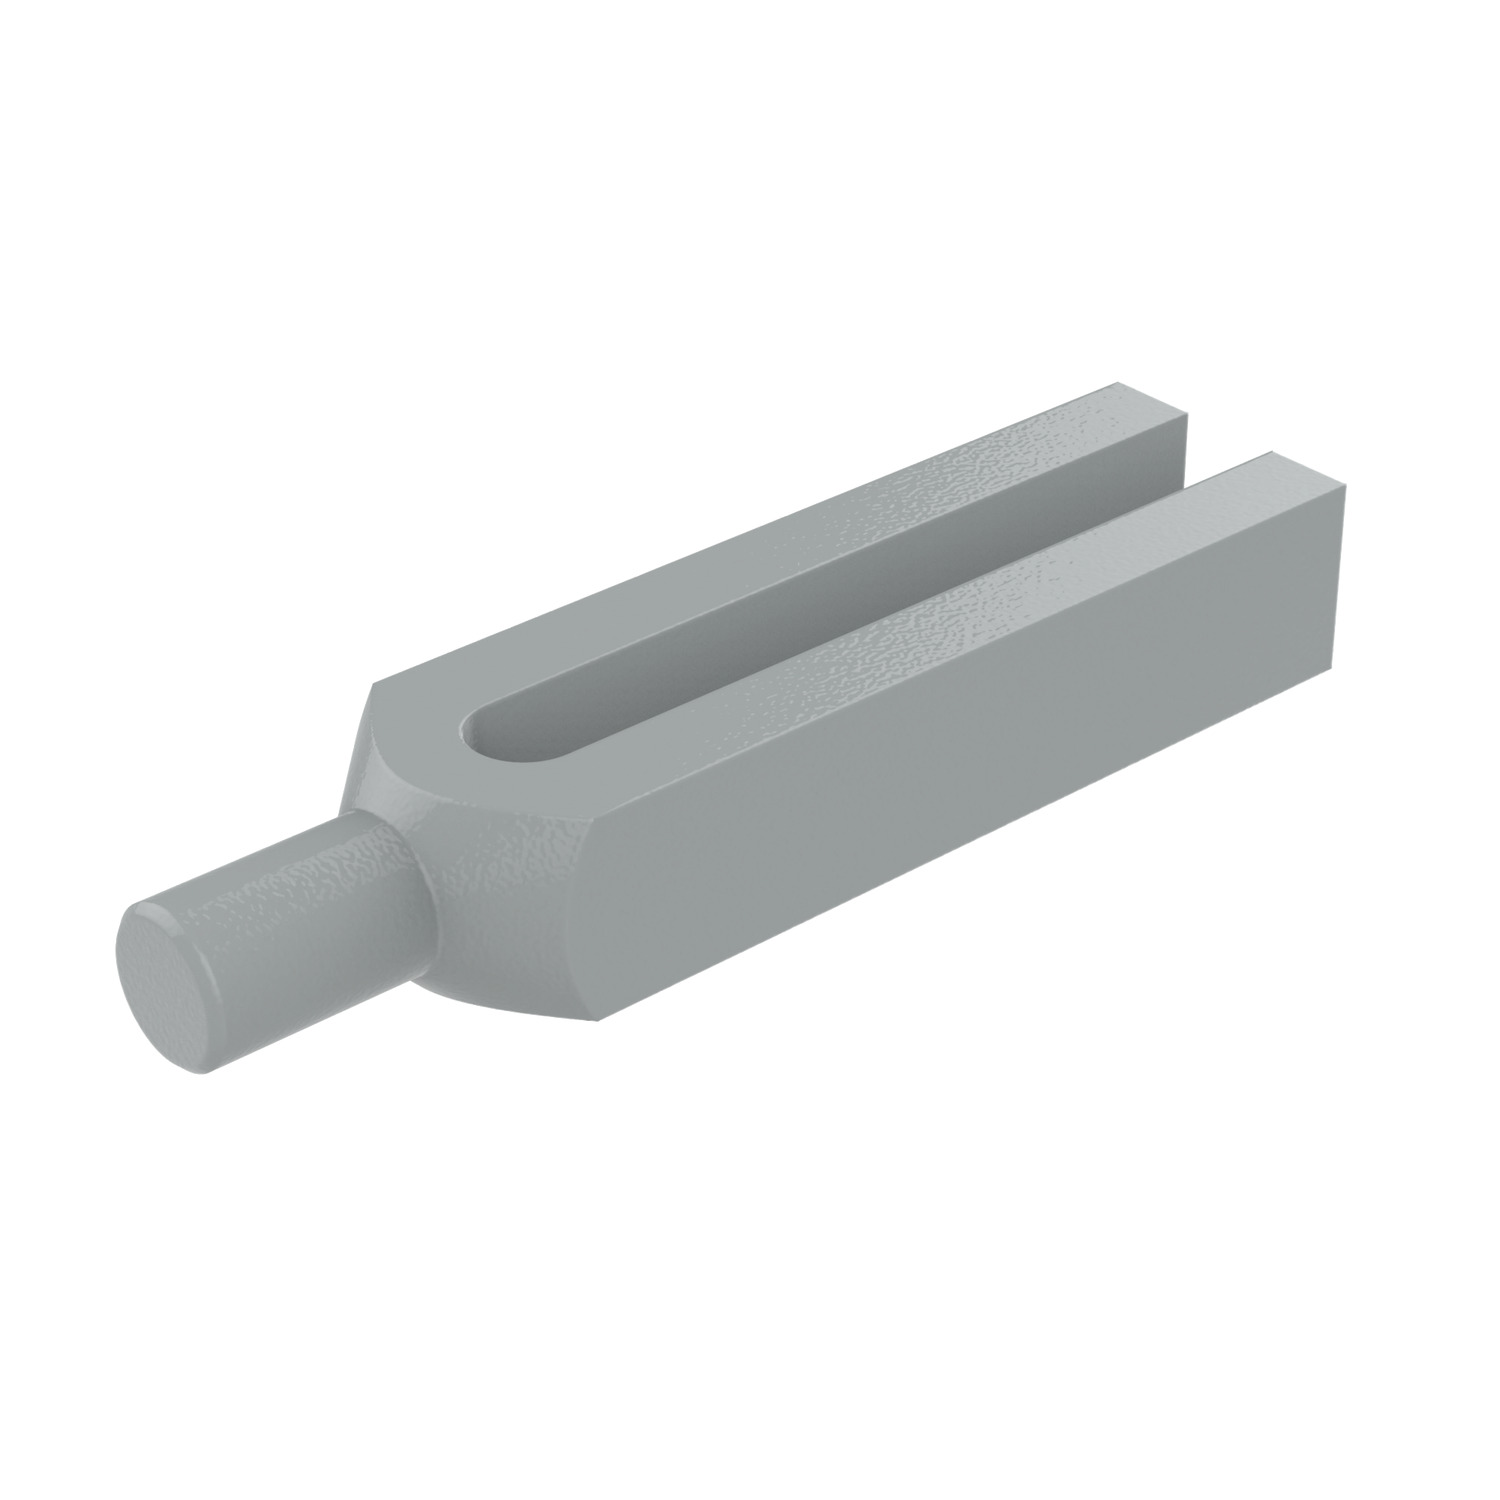 Product 10120, Forked Clamps with pin end / 